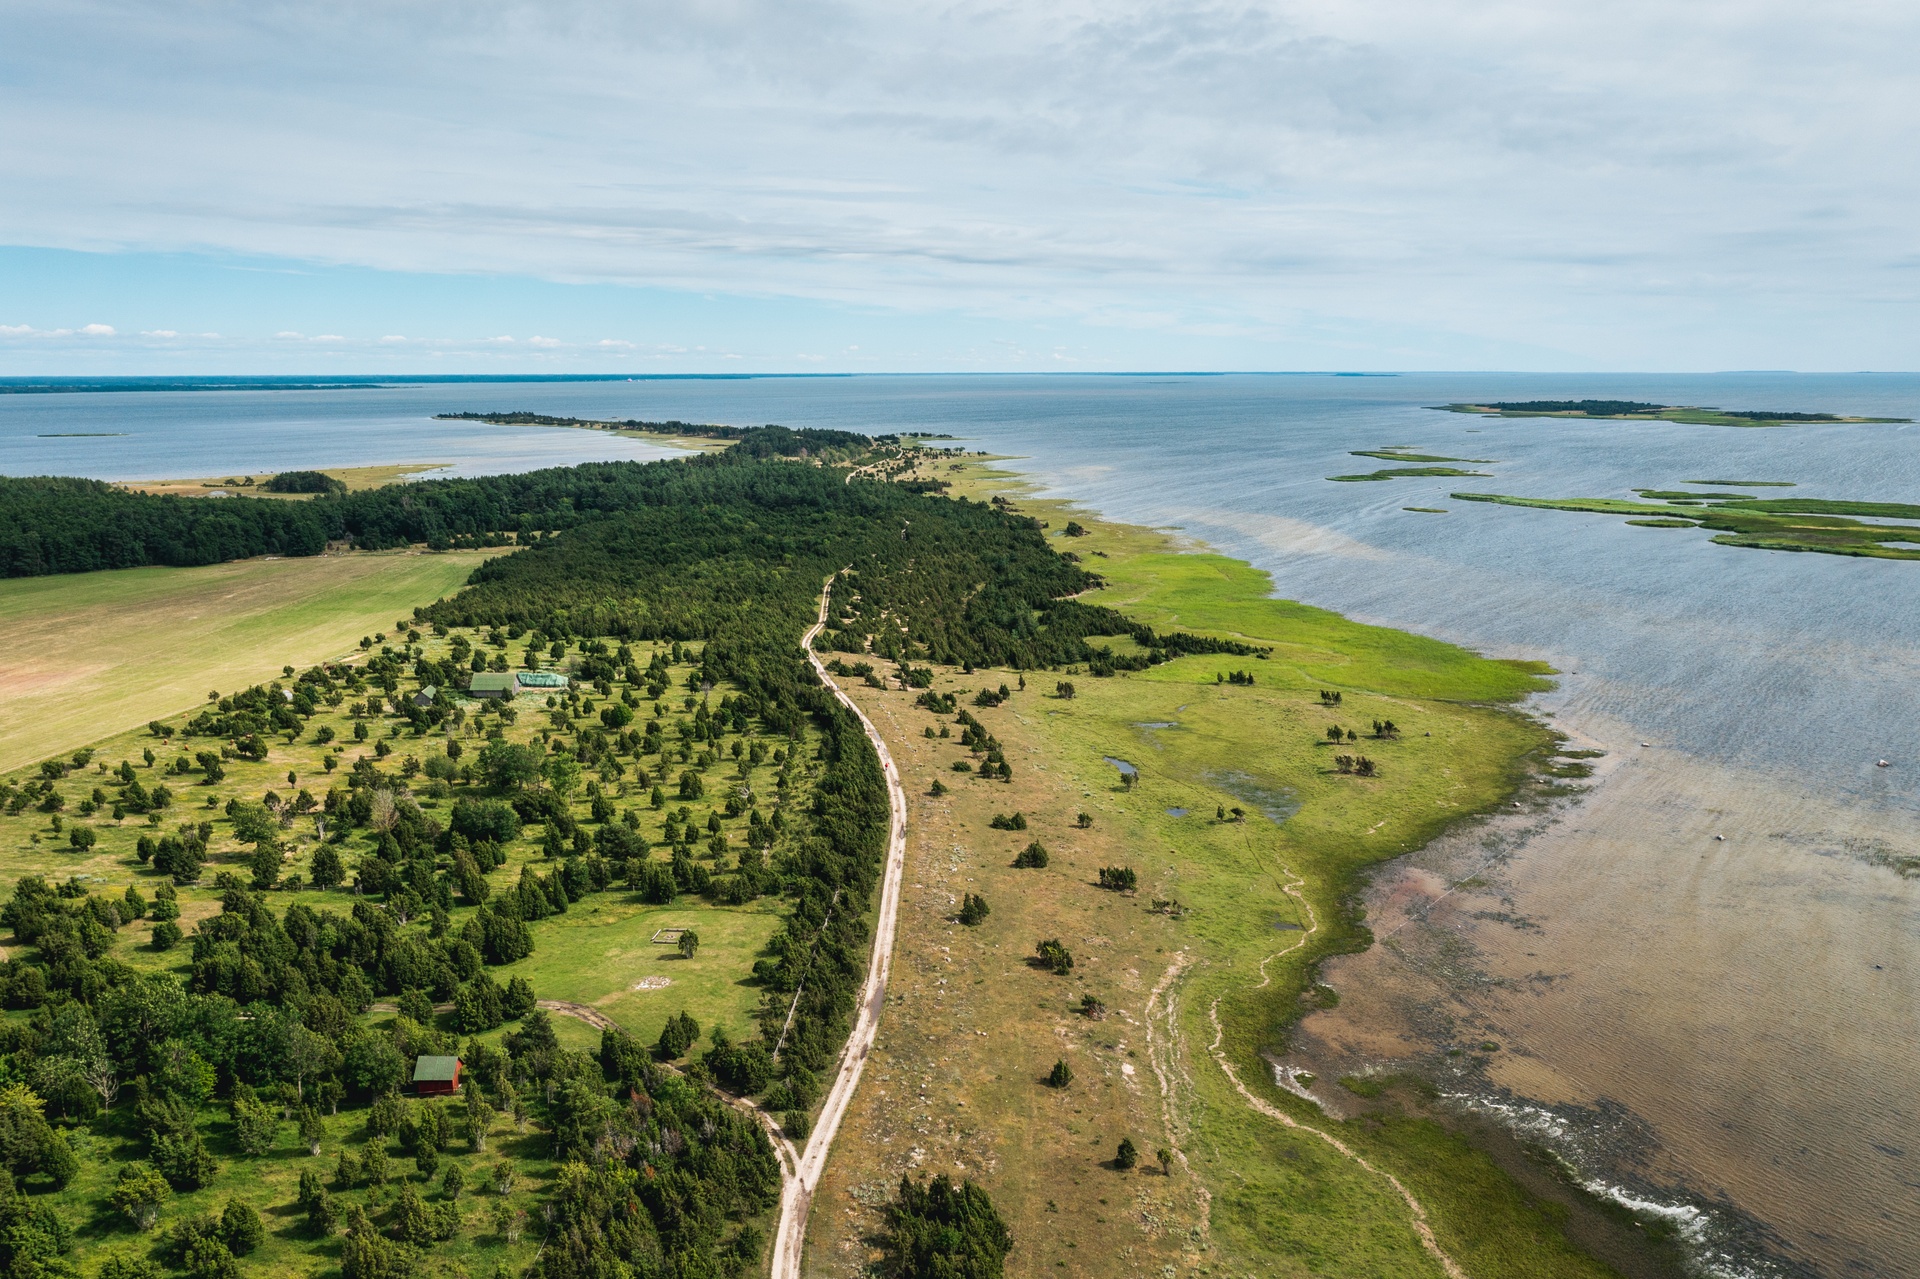 Tips for hiking the Baltic Coastal Trail